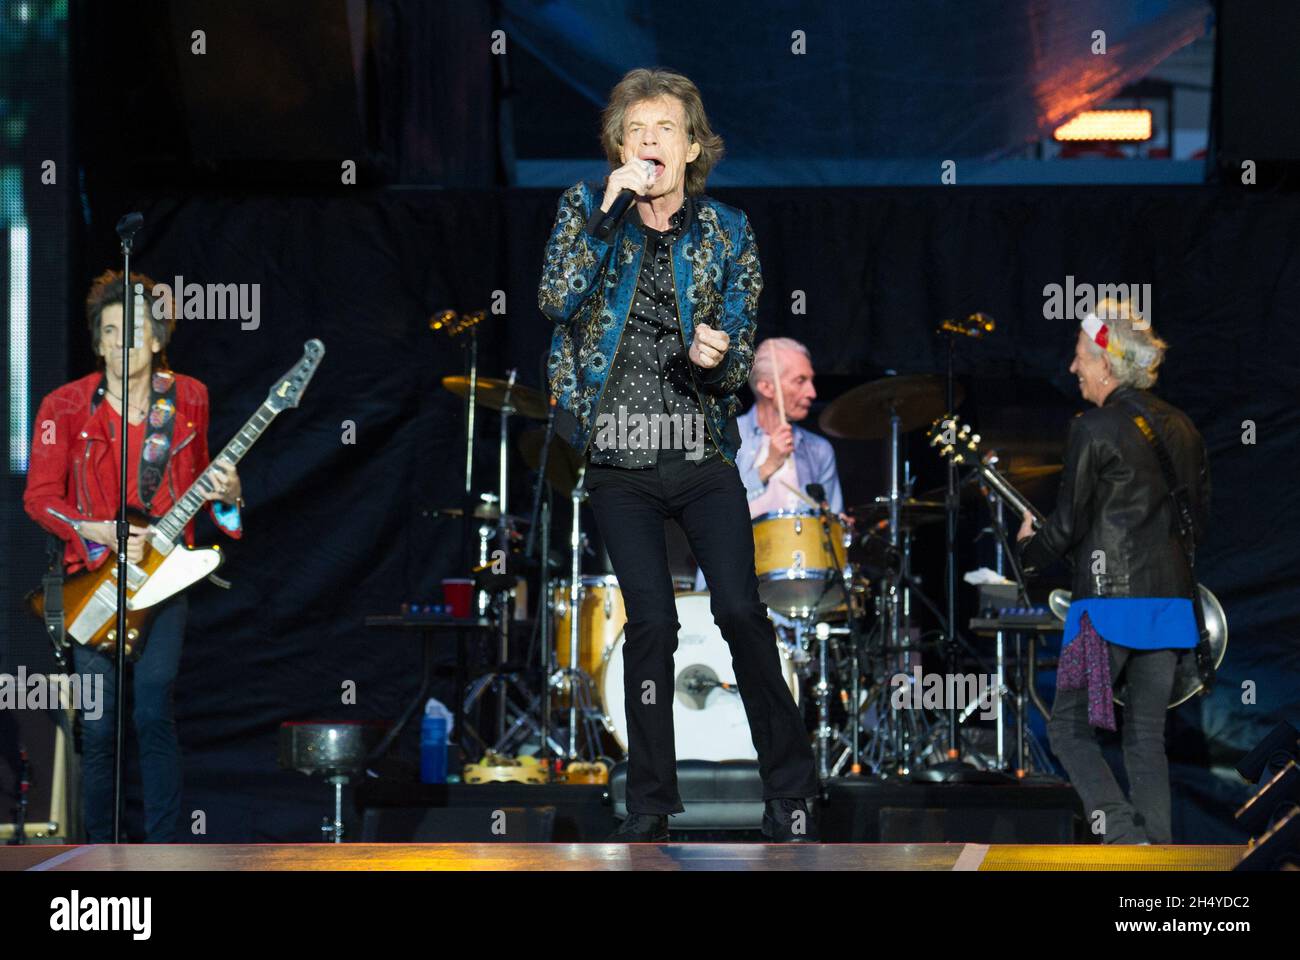 Mick Jagger, Keith Richards, Ronnie Wood and Charlie Watts of The Rolling Stones perform on stage at Ricoh Arena on June 02, 2018 in Coventry, England. Picture date: Saturday 02 June, 2018. Photo credit: Katja Ogrin/ EMPICS Entertainment. Stock Photo